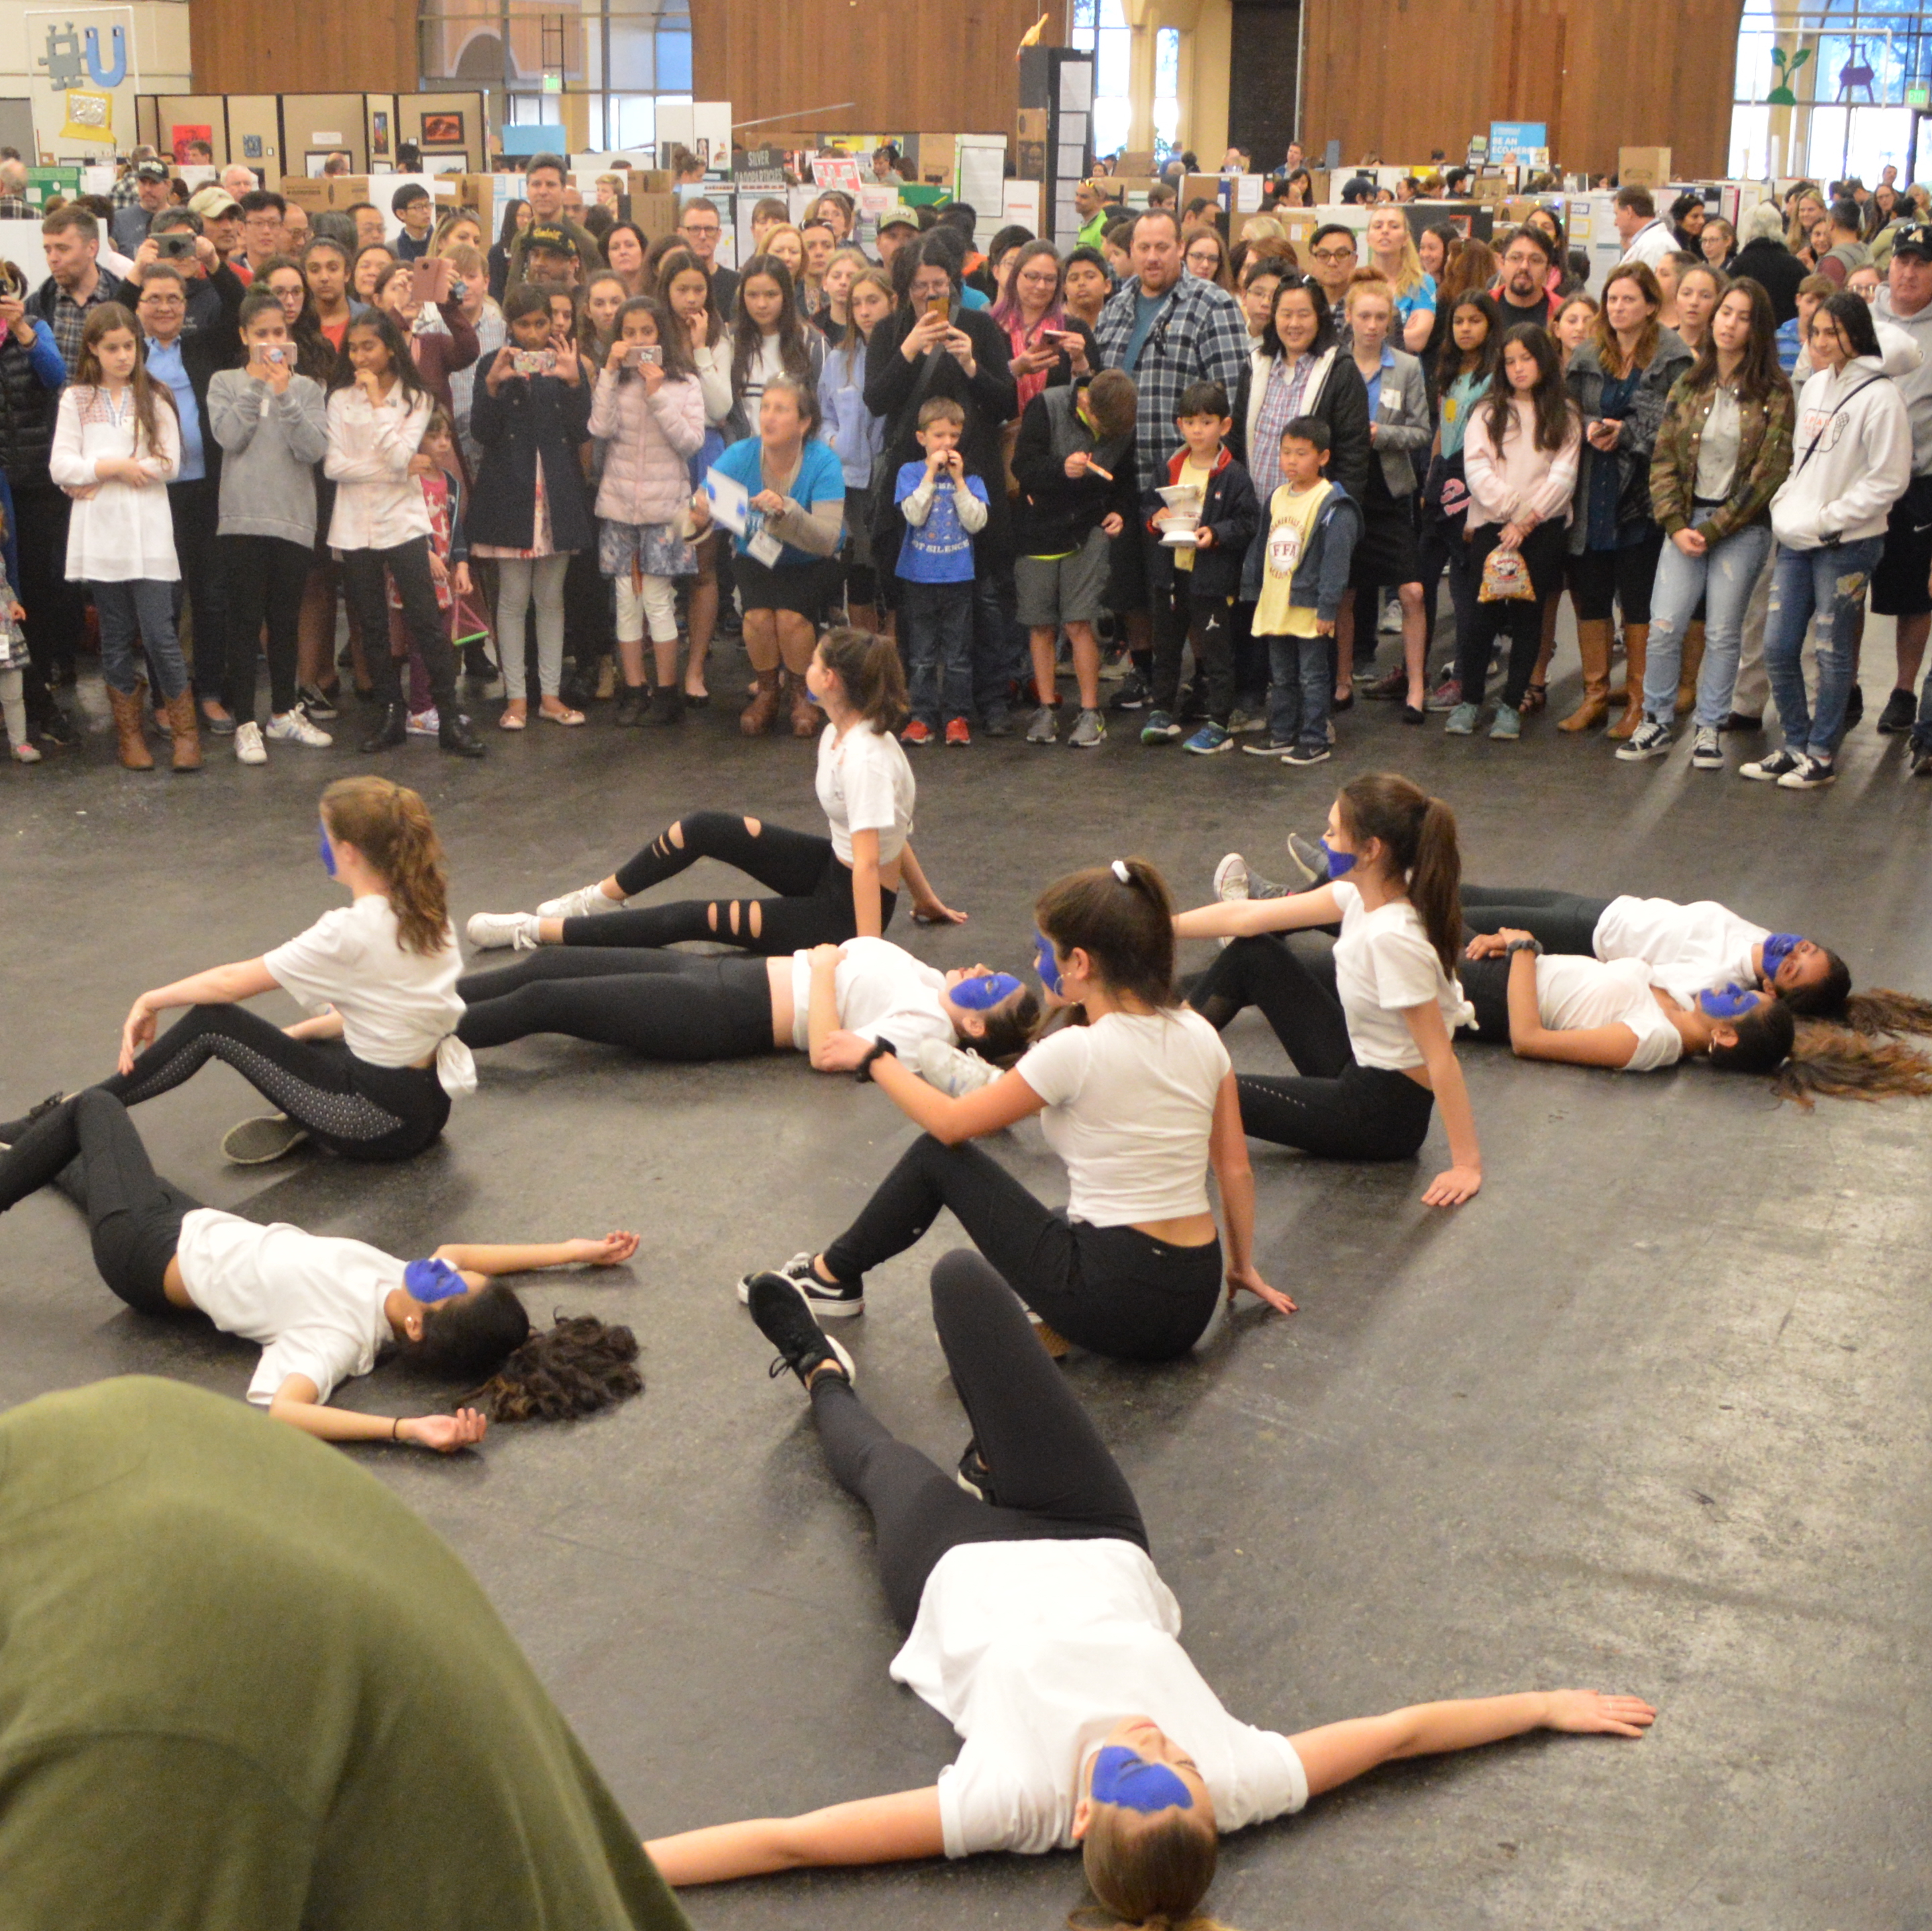 Students perform an interpretive dance number at The Next Big Think.